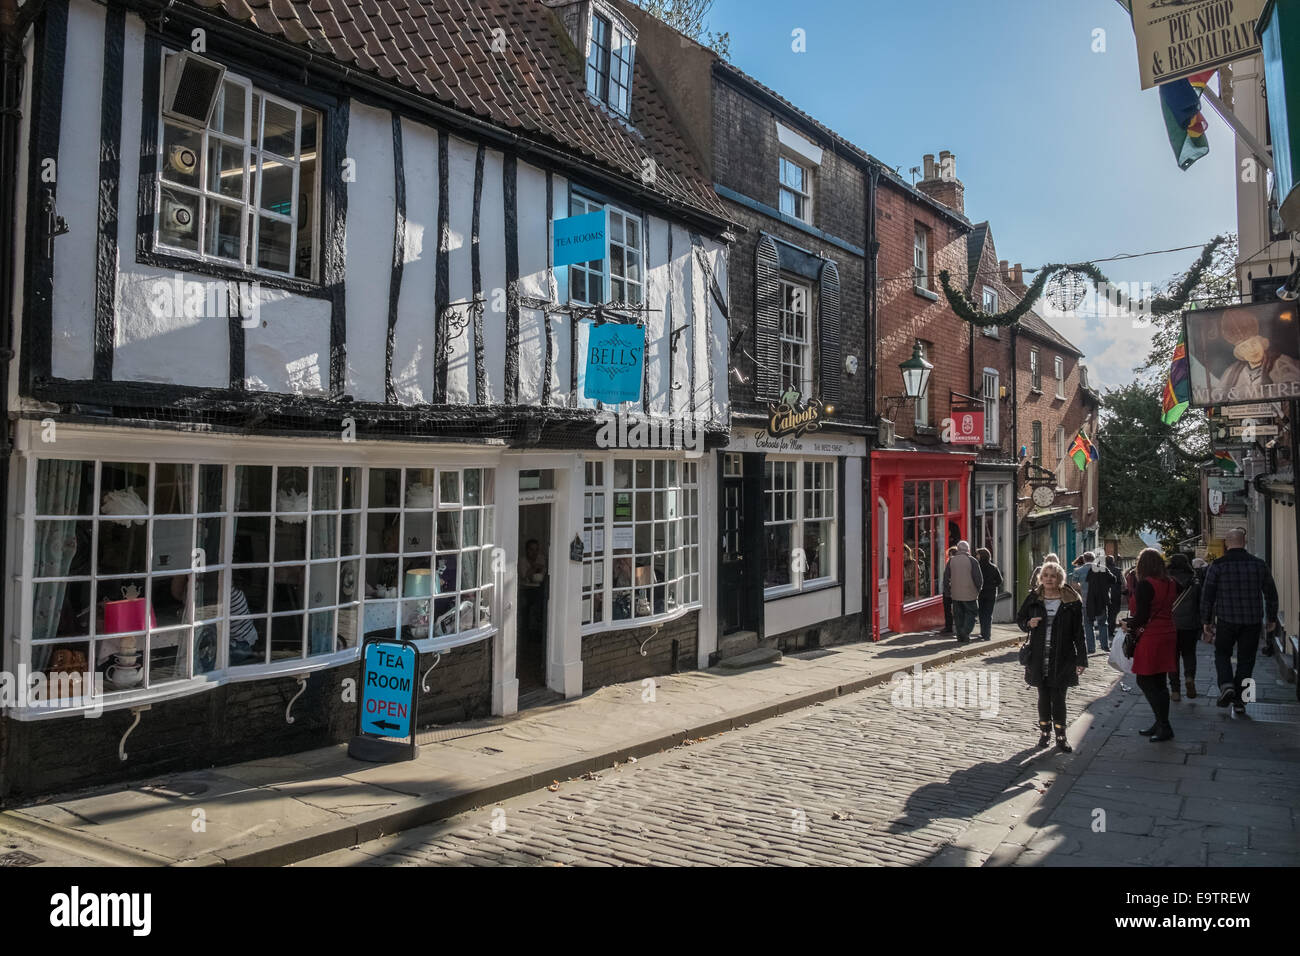 Bells Tea Room exterior, Steep Hill, Lincoln, Lincolnshire, England UK Stock Photo